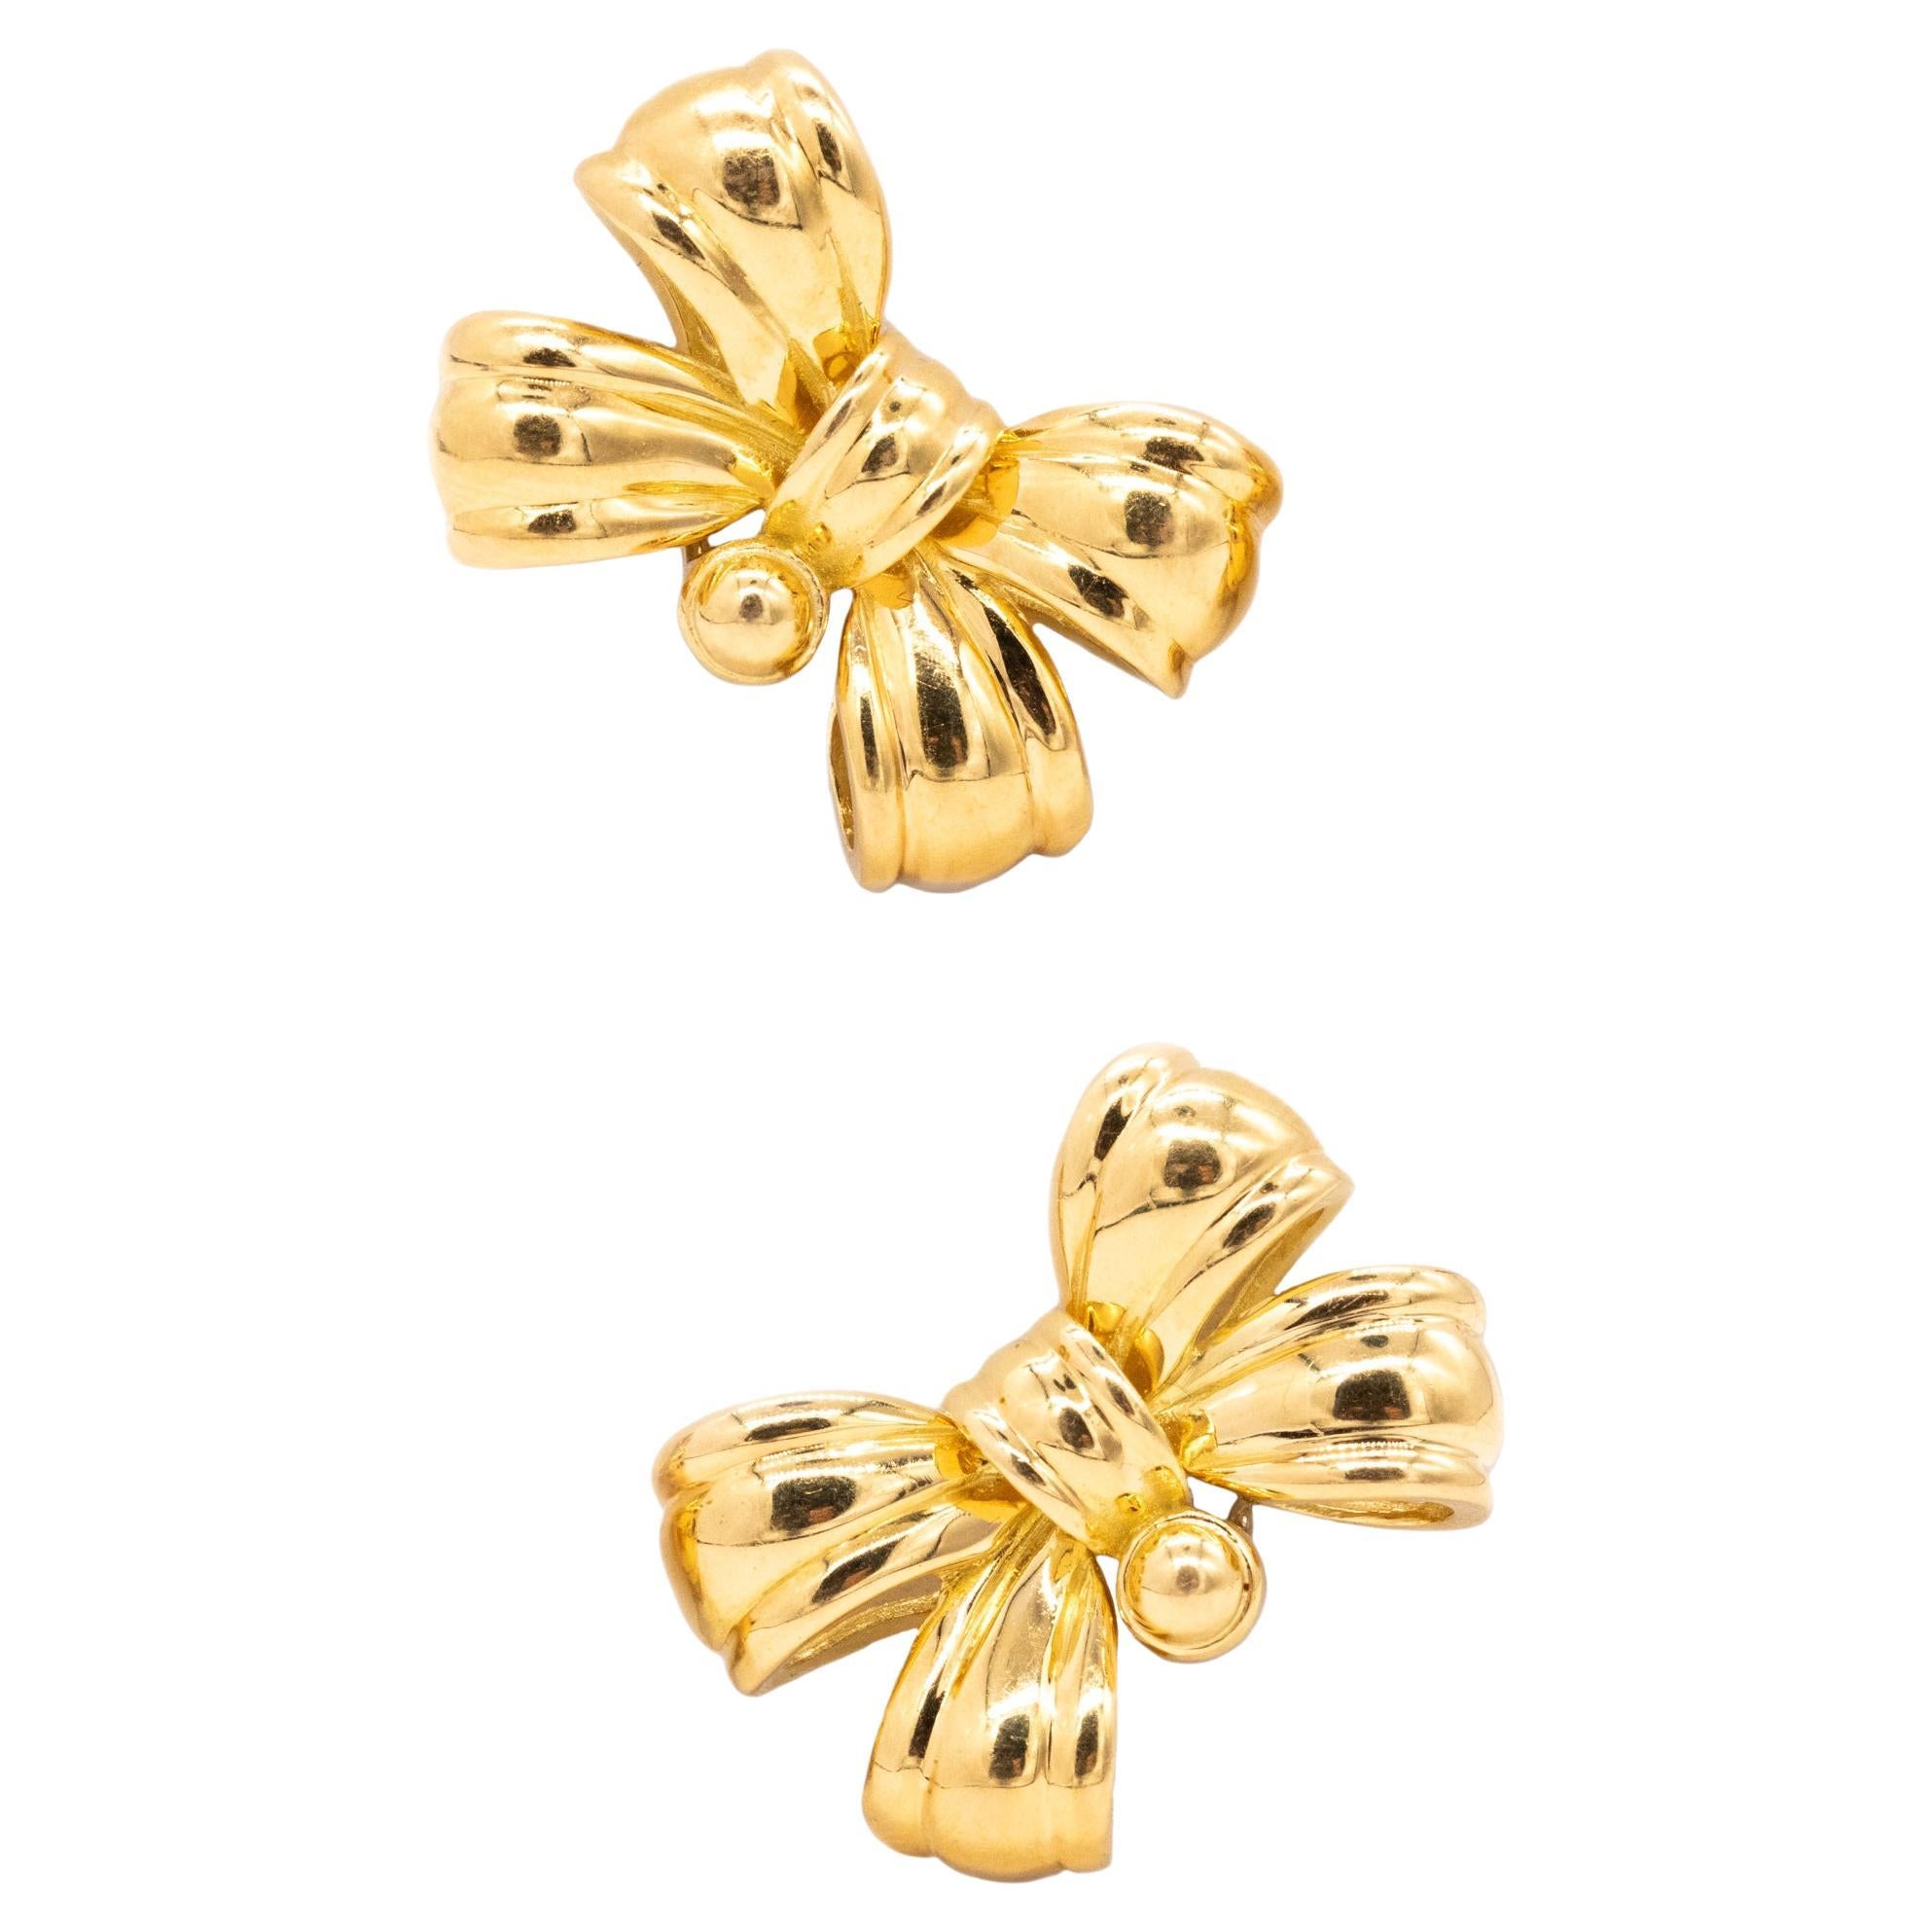 JP Bellin Paris French Pair Of Bows Clips Earrings Solid 18 Karats Yellow Gold For Sale